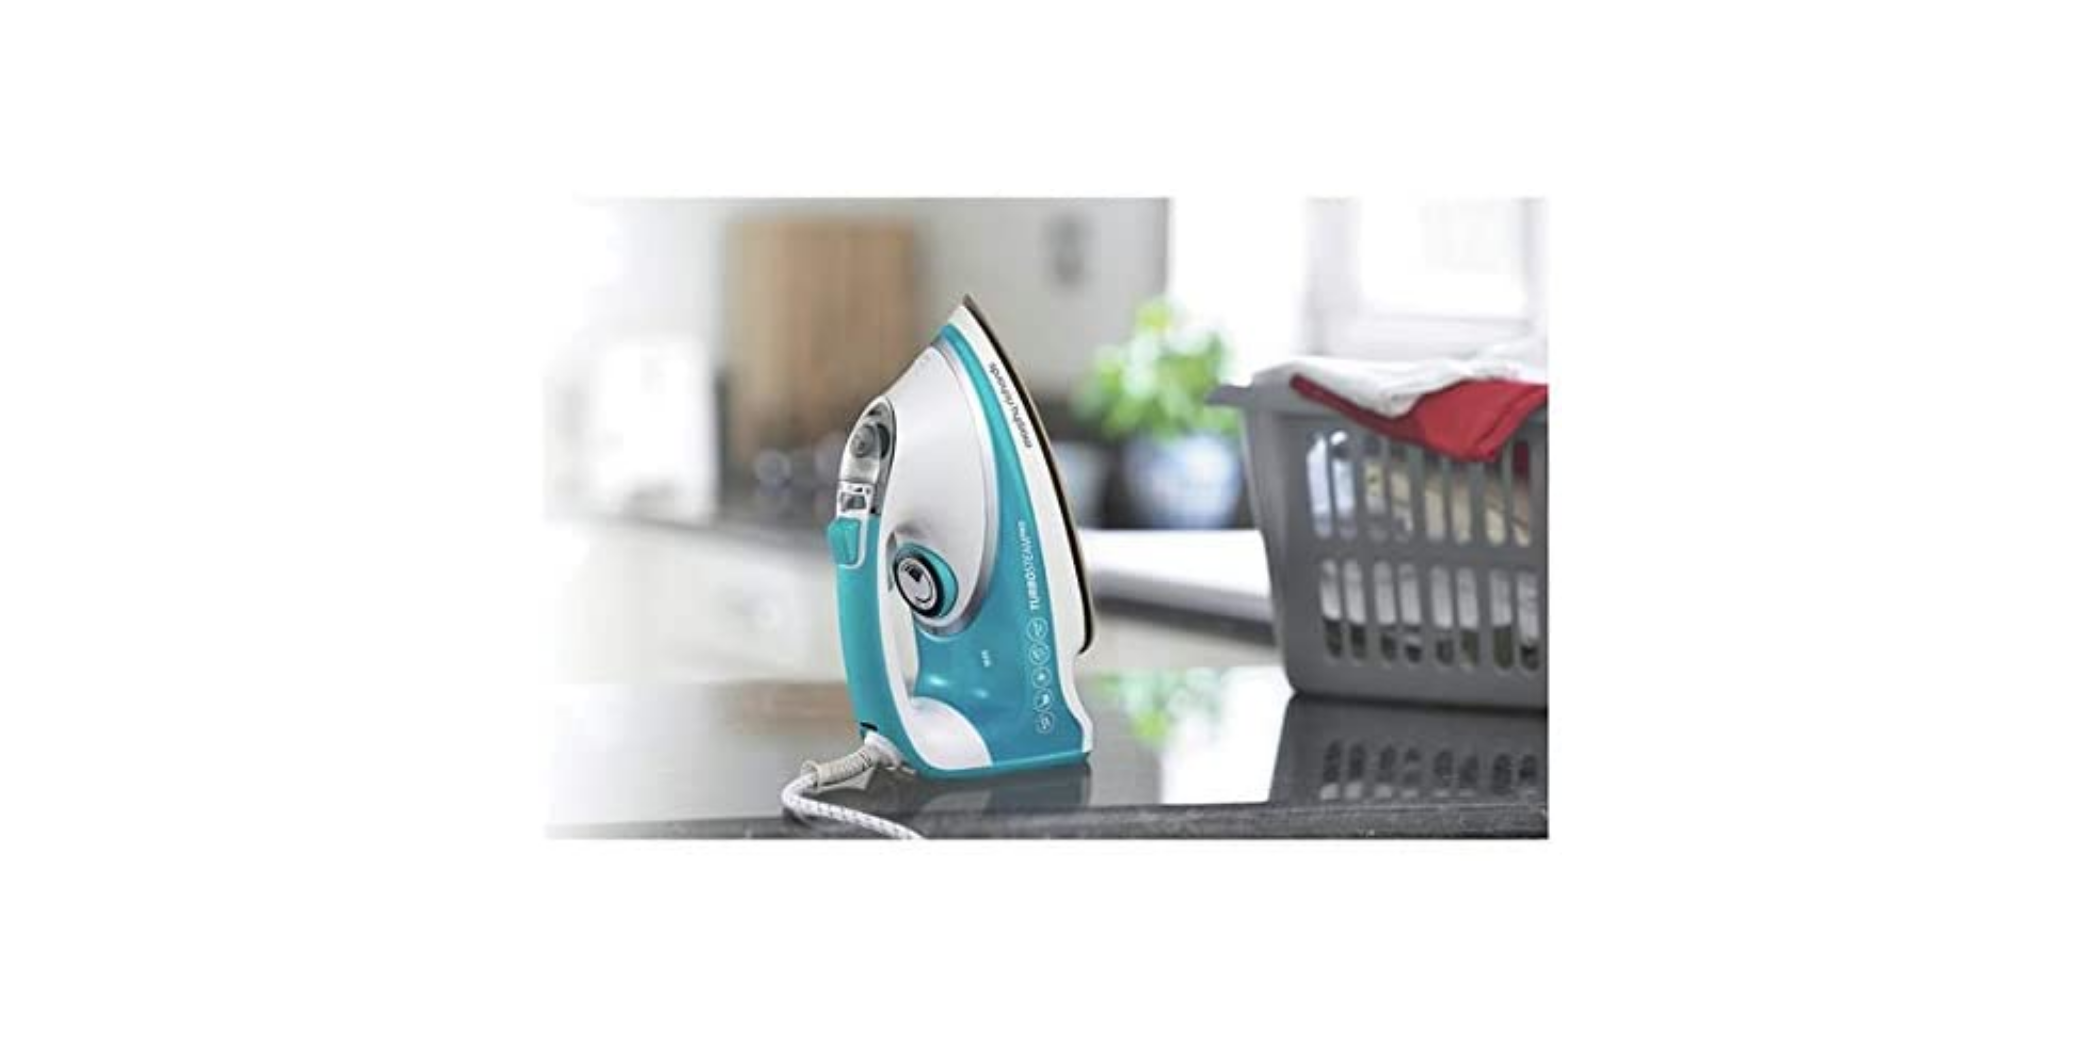 Morphy Richards 303128 T/Steam ProPearlCer S/Iron